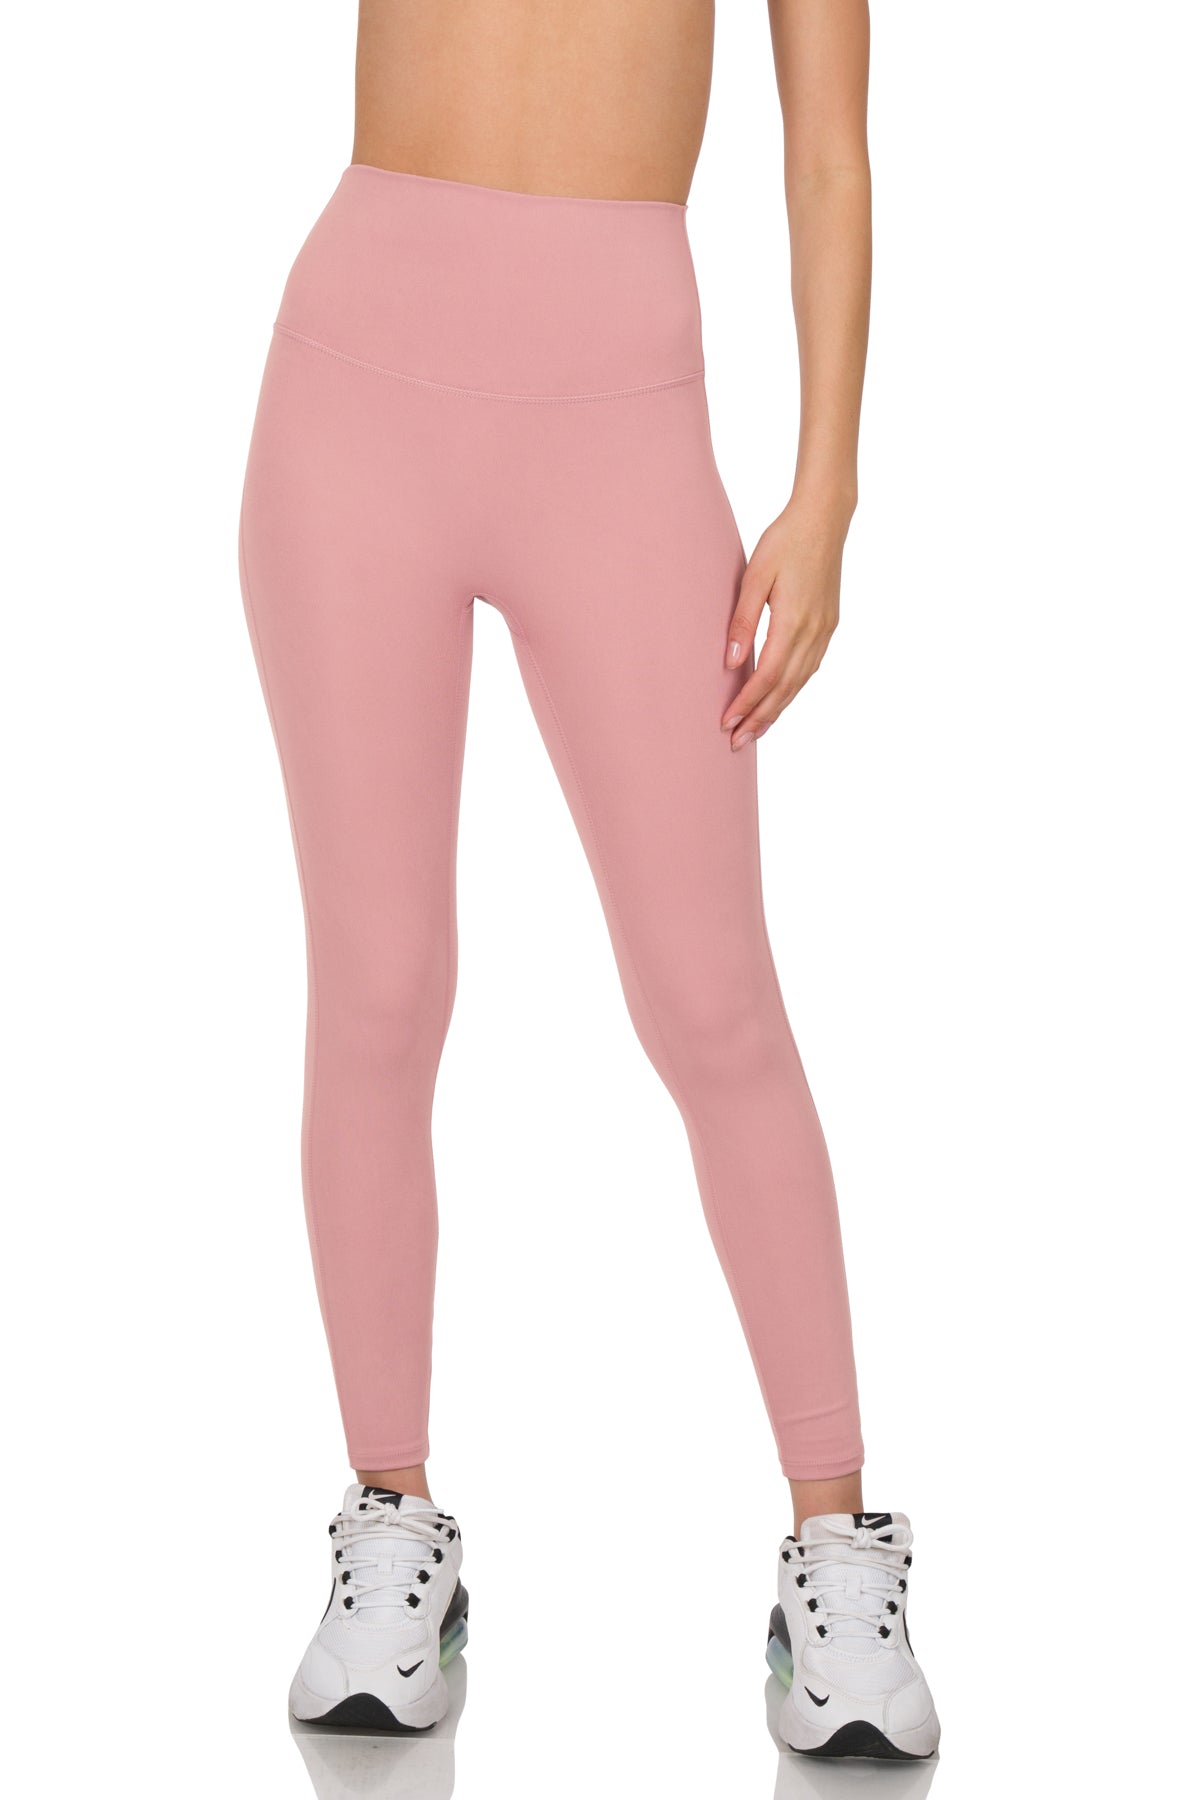 Zyia Pink Mojave Light n Tight Hi Rise Legging size 16-18 - $33 - From  Eunice